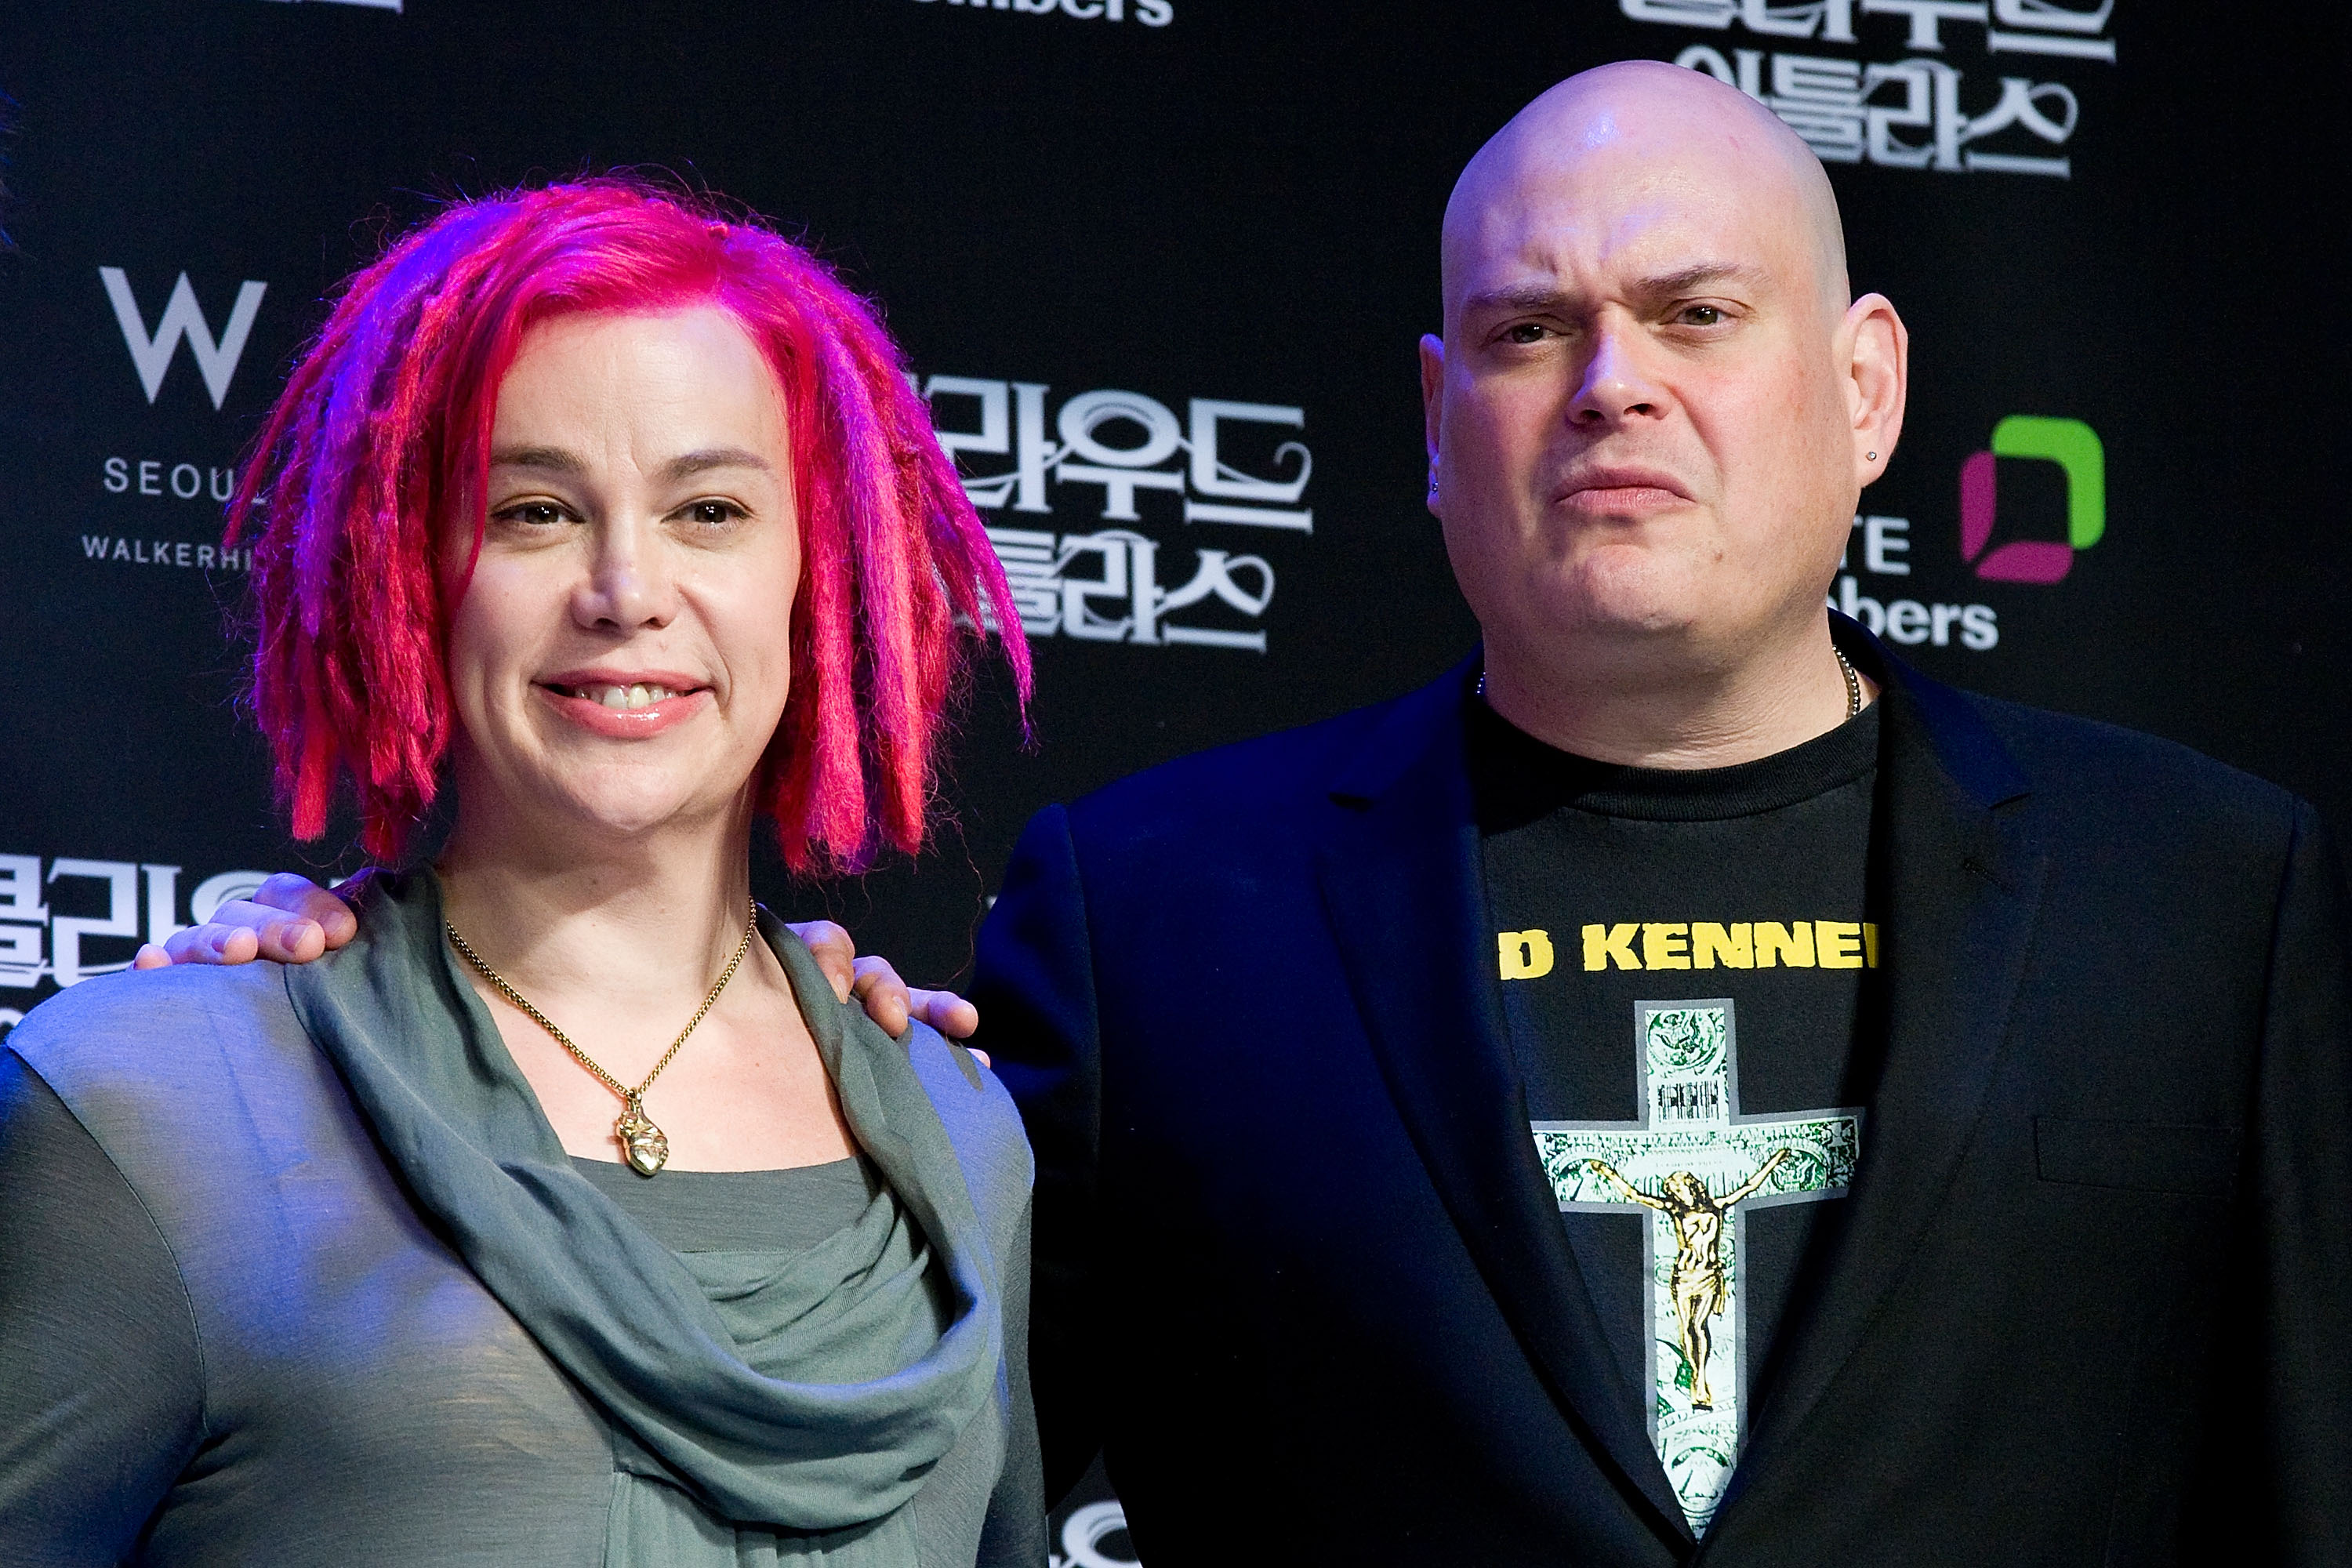 Lana Wachowski and Andy Wachowski during the "Cloud Atlas" press conference at Sheraton Walkerhill Hotel on December 13, 2012 in Seoul, South Korea. | Source: Getty Images